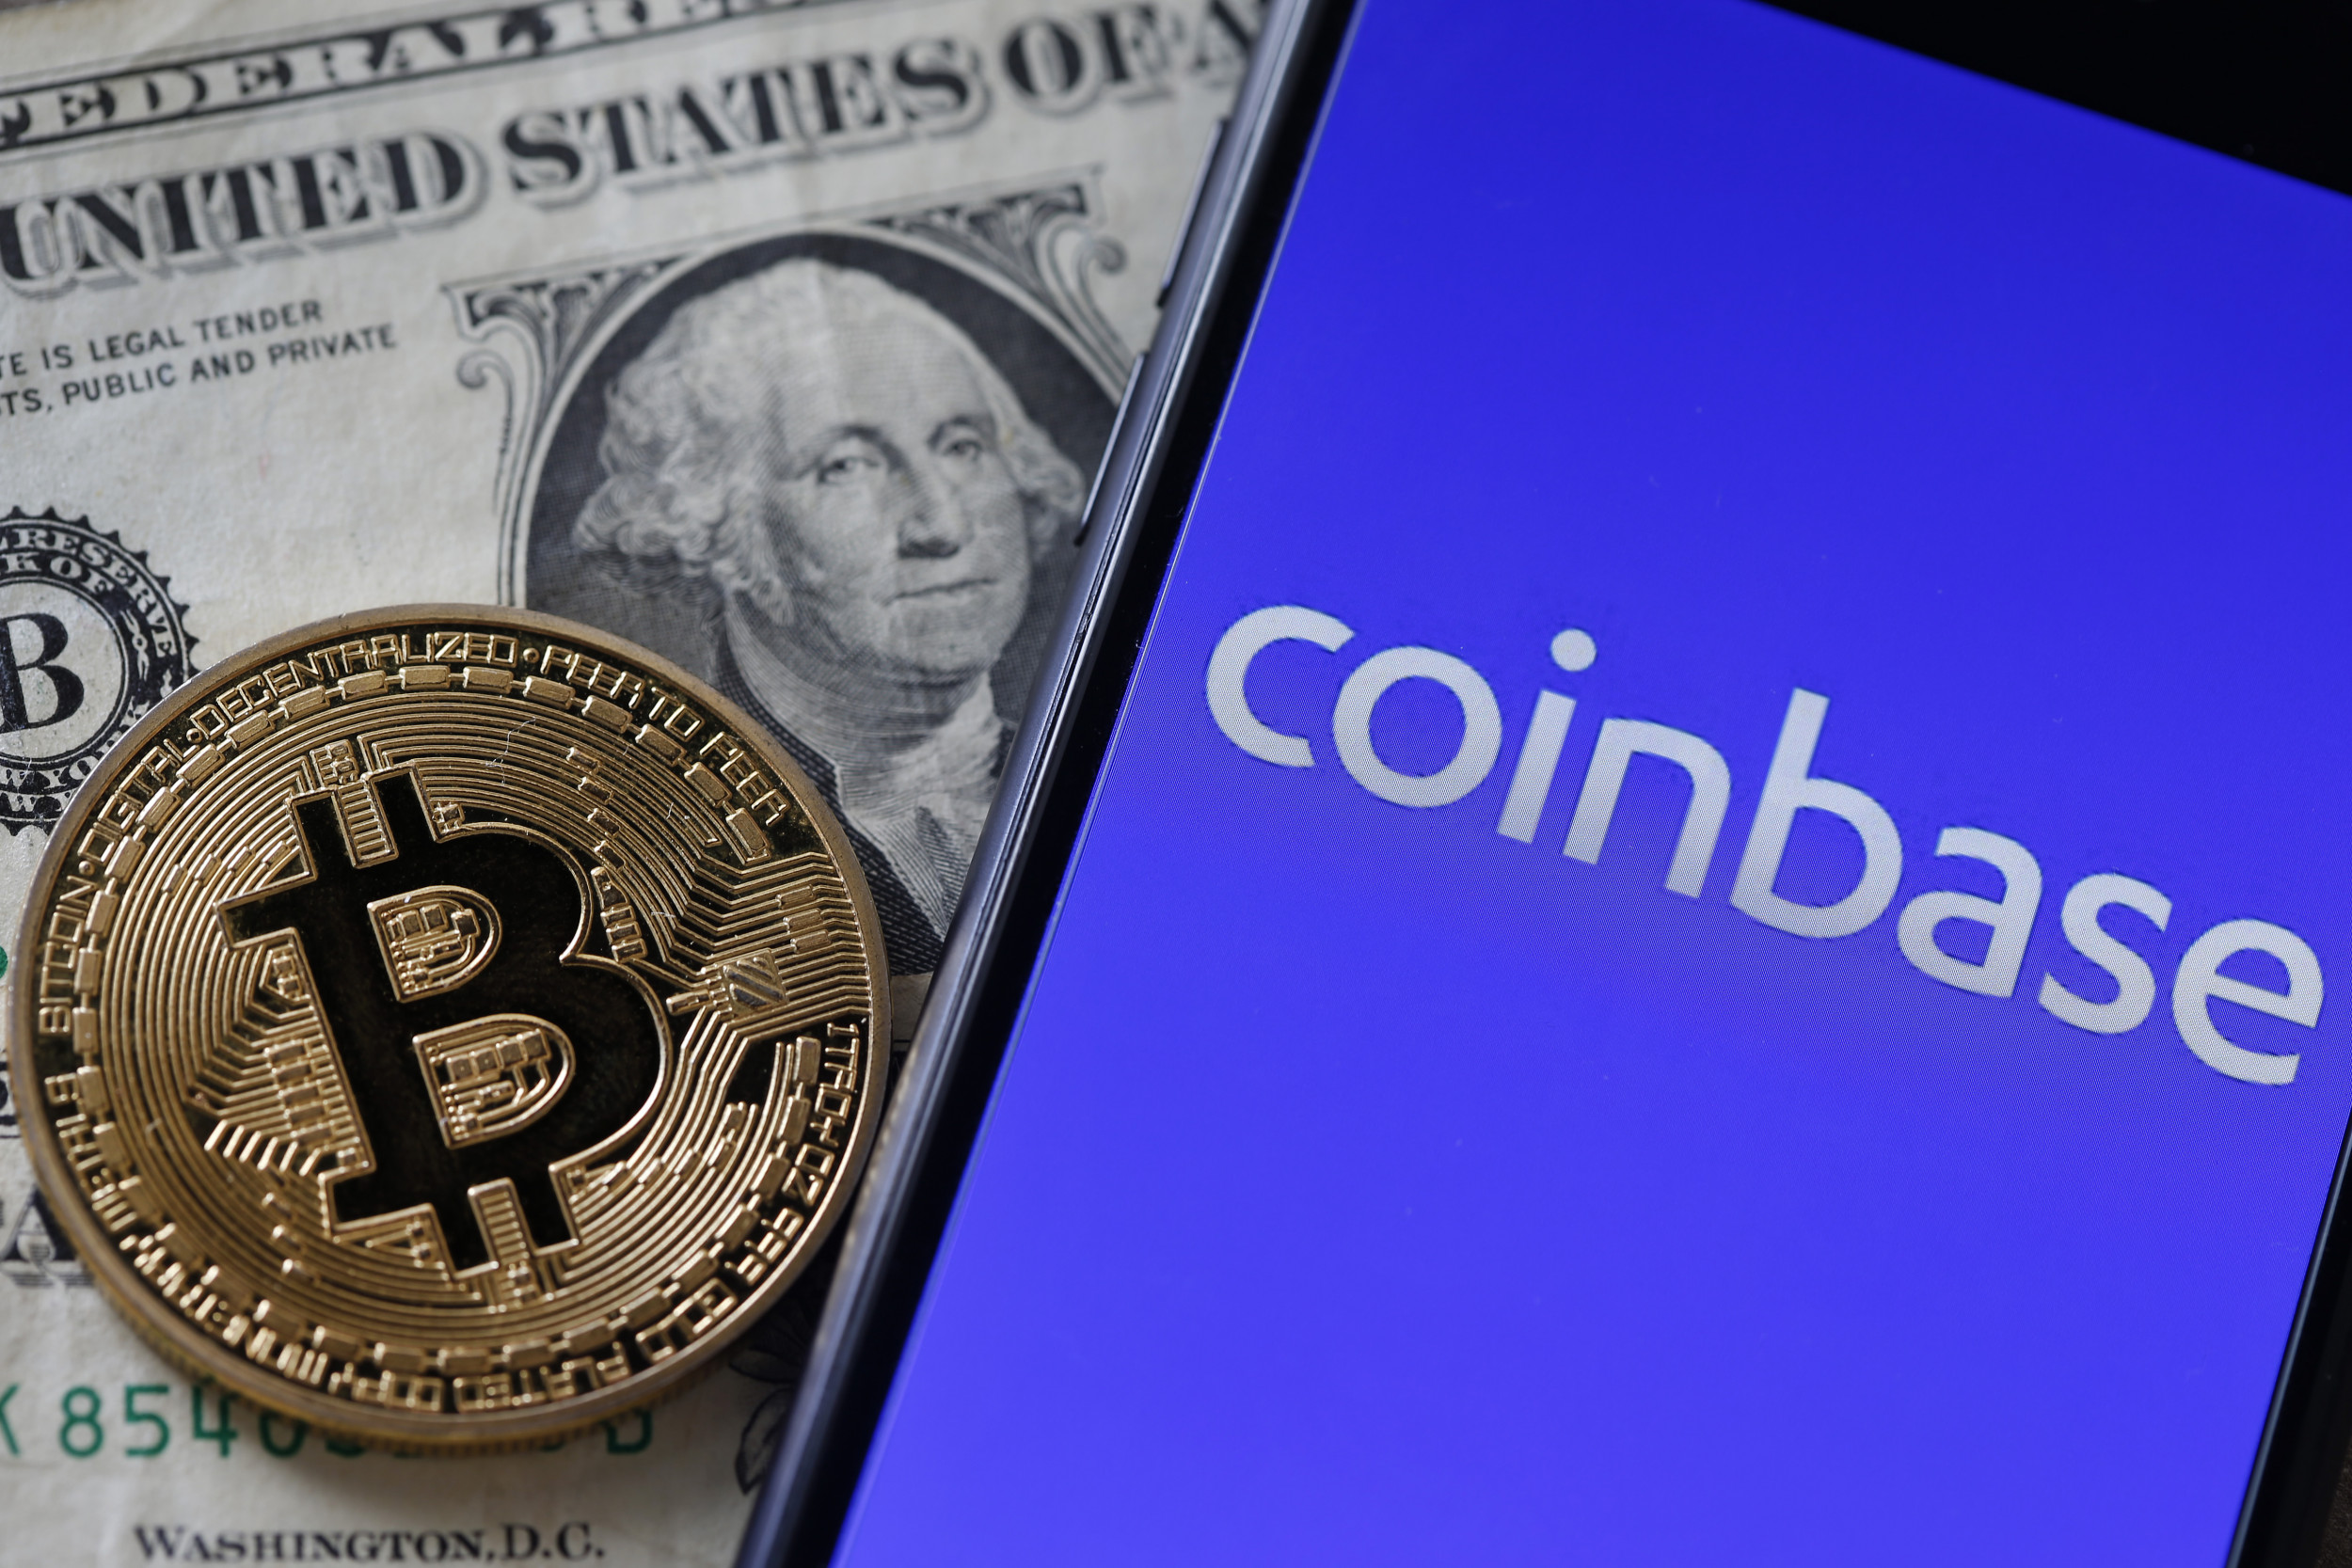 Coinbase, 9YearOld Cryptocurrency Co., is More Valuable Than Citigroup, Stanley, BlackRock